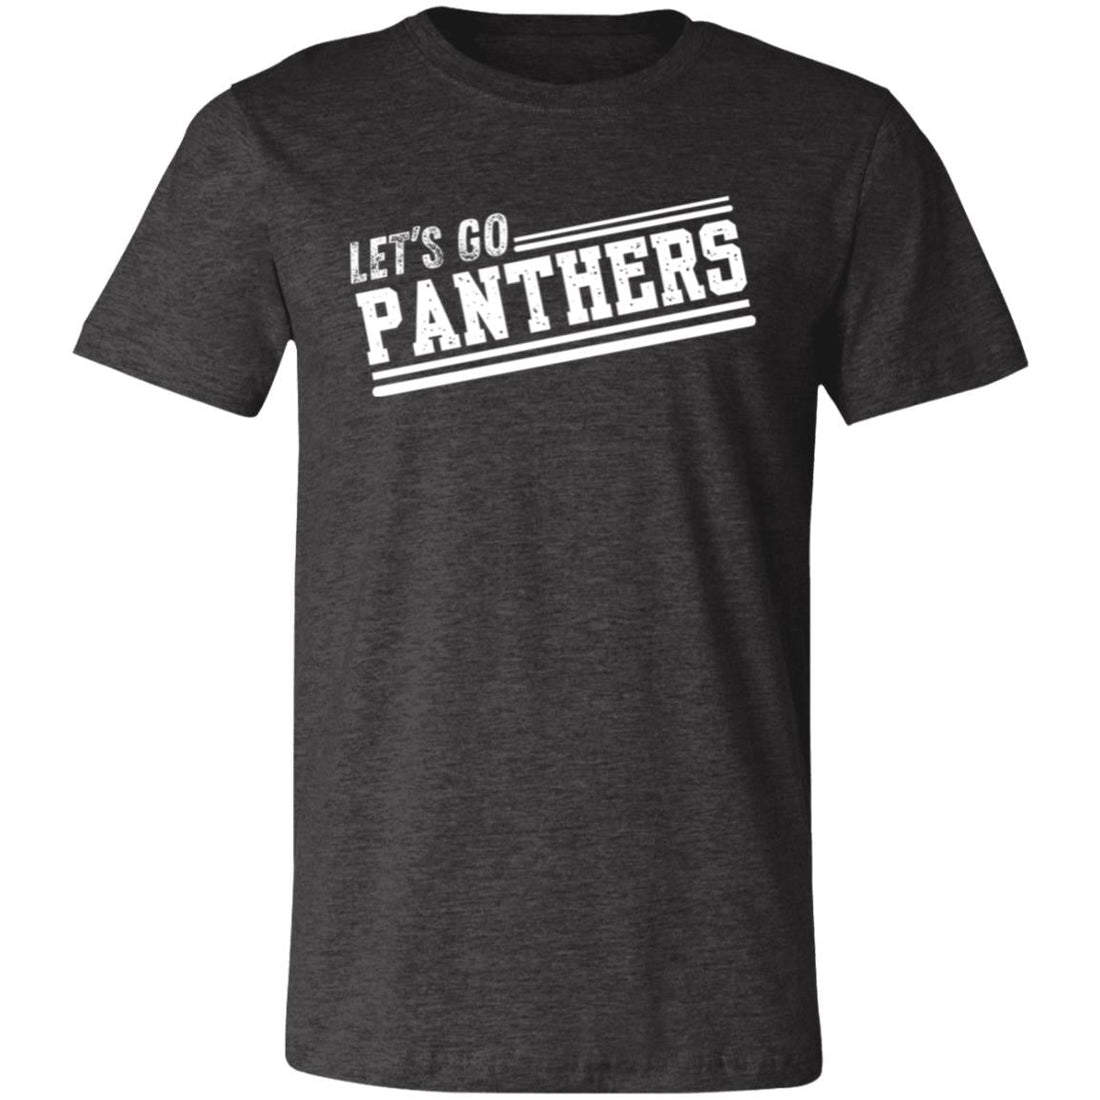 Let's Go Panthers T - Shirt - T - Shirts - Positively Sassy - Let's Go Panthers T - Shirt